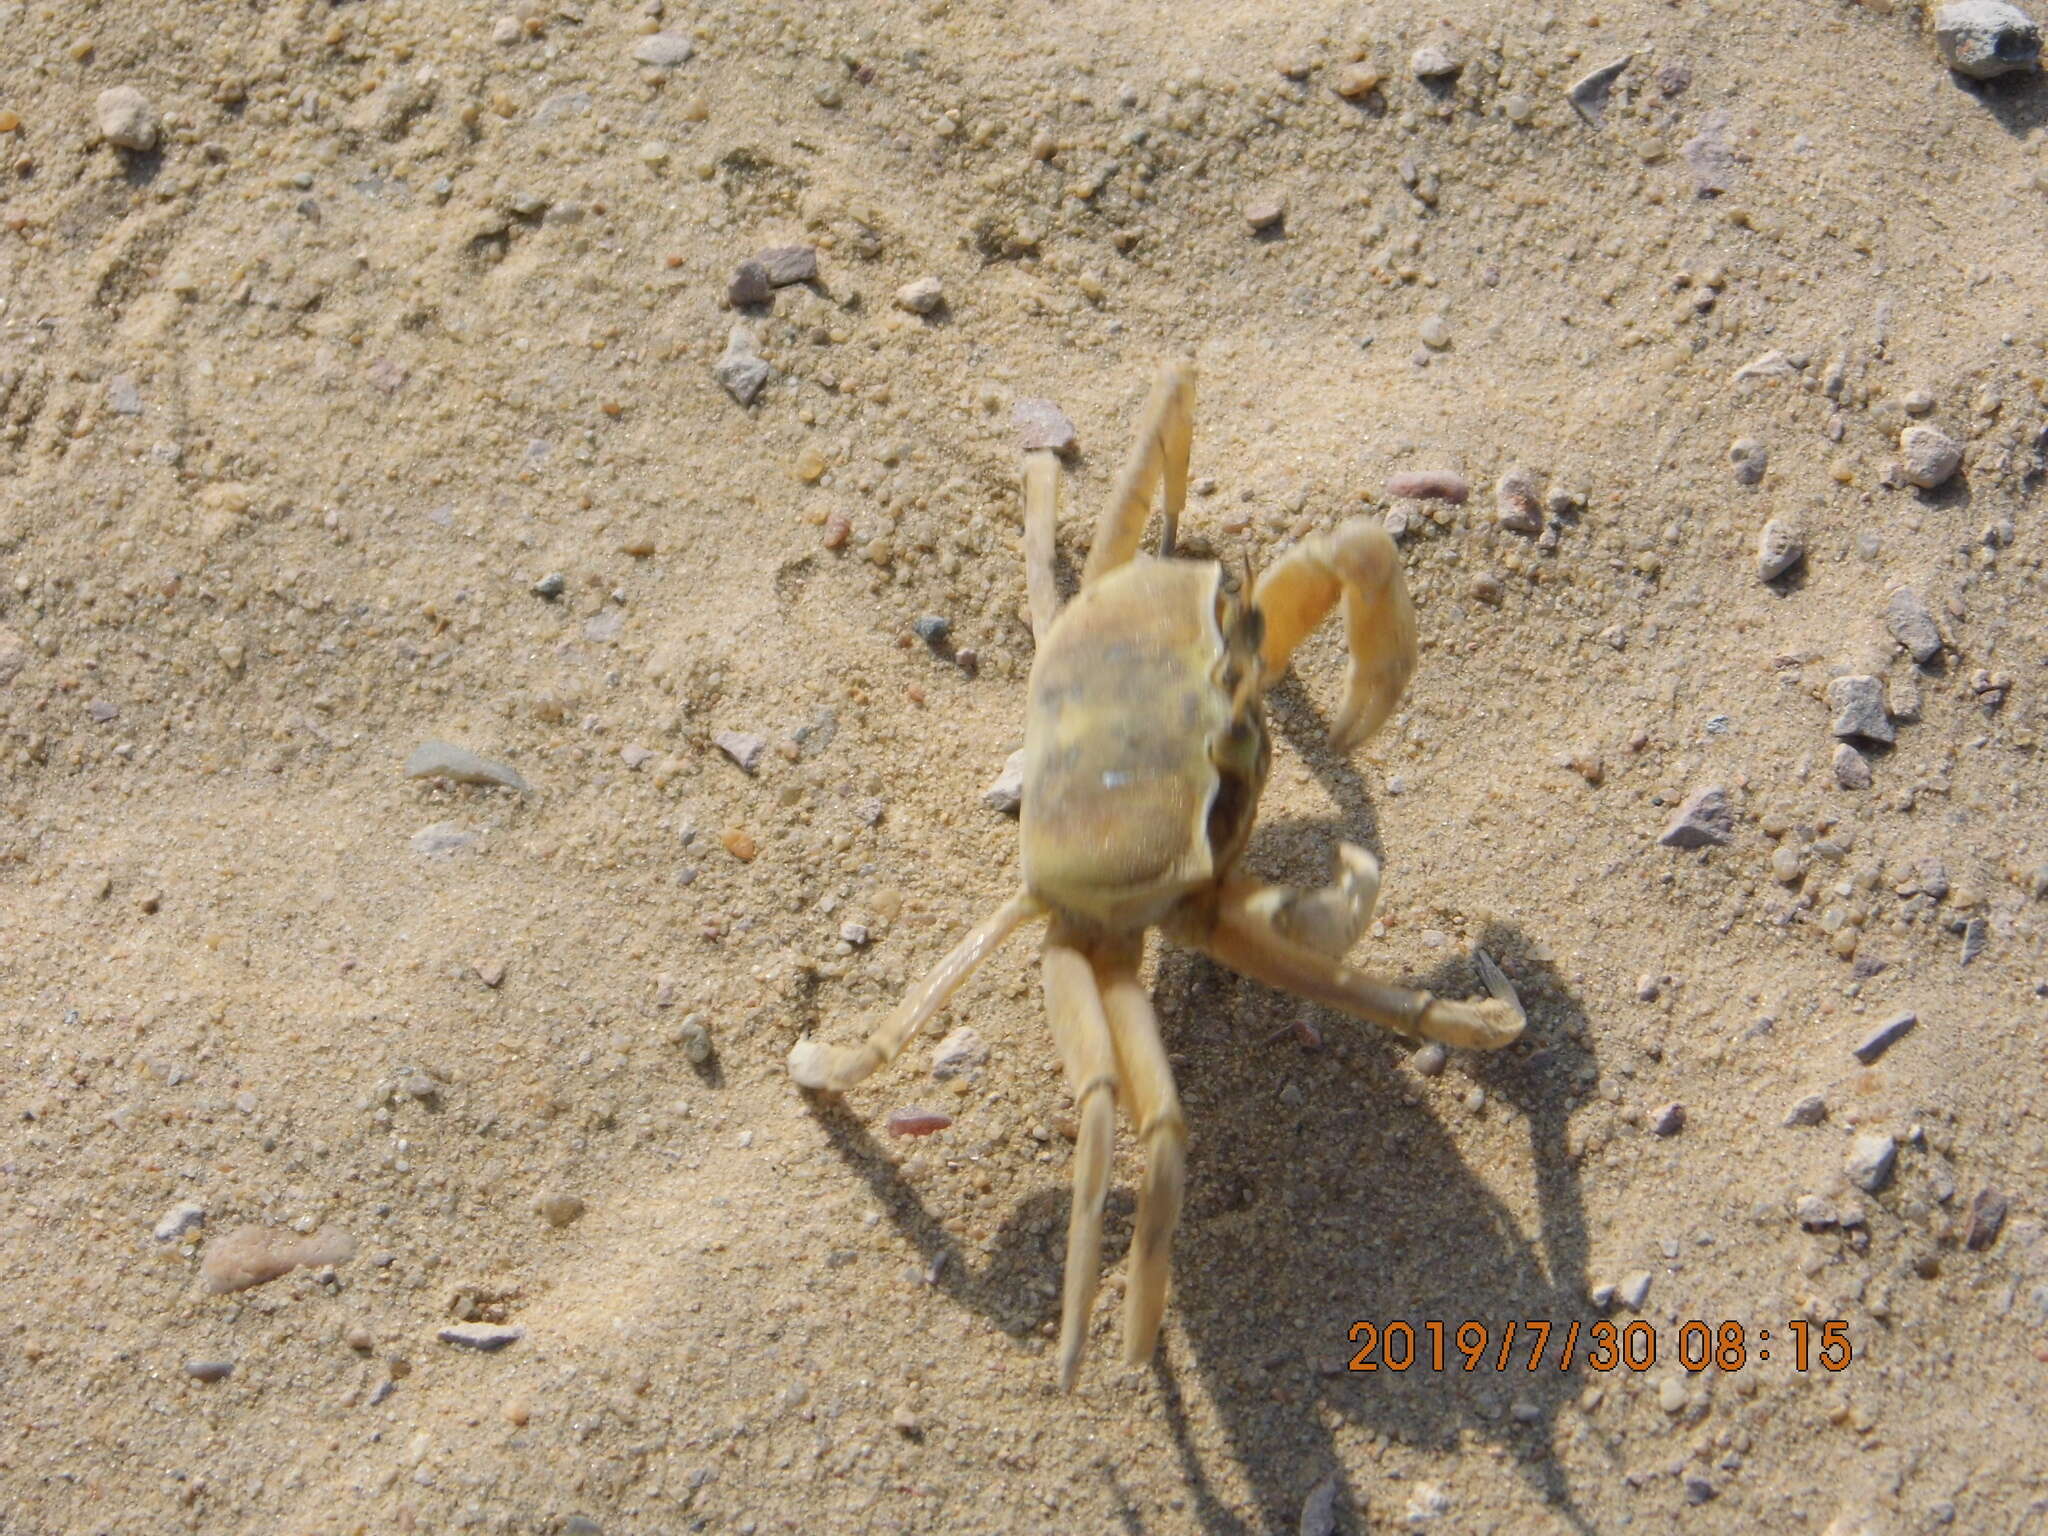 Image of tufted ghost crab